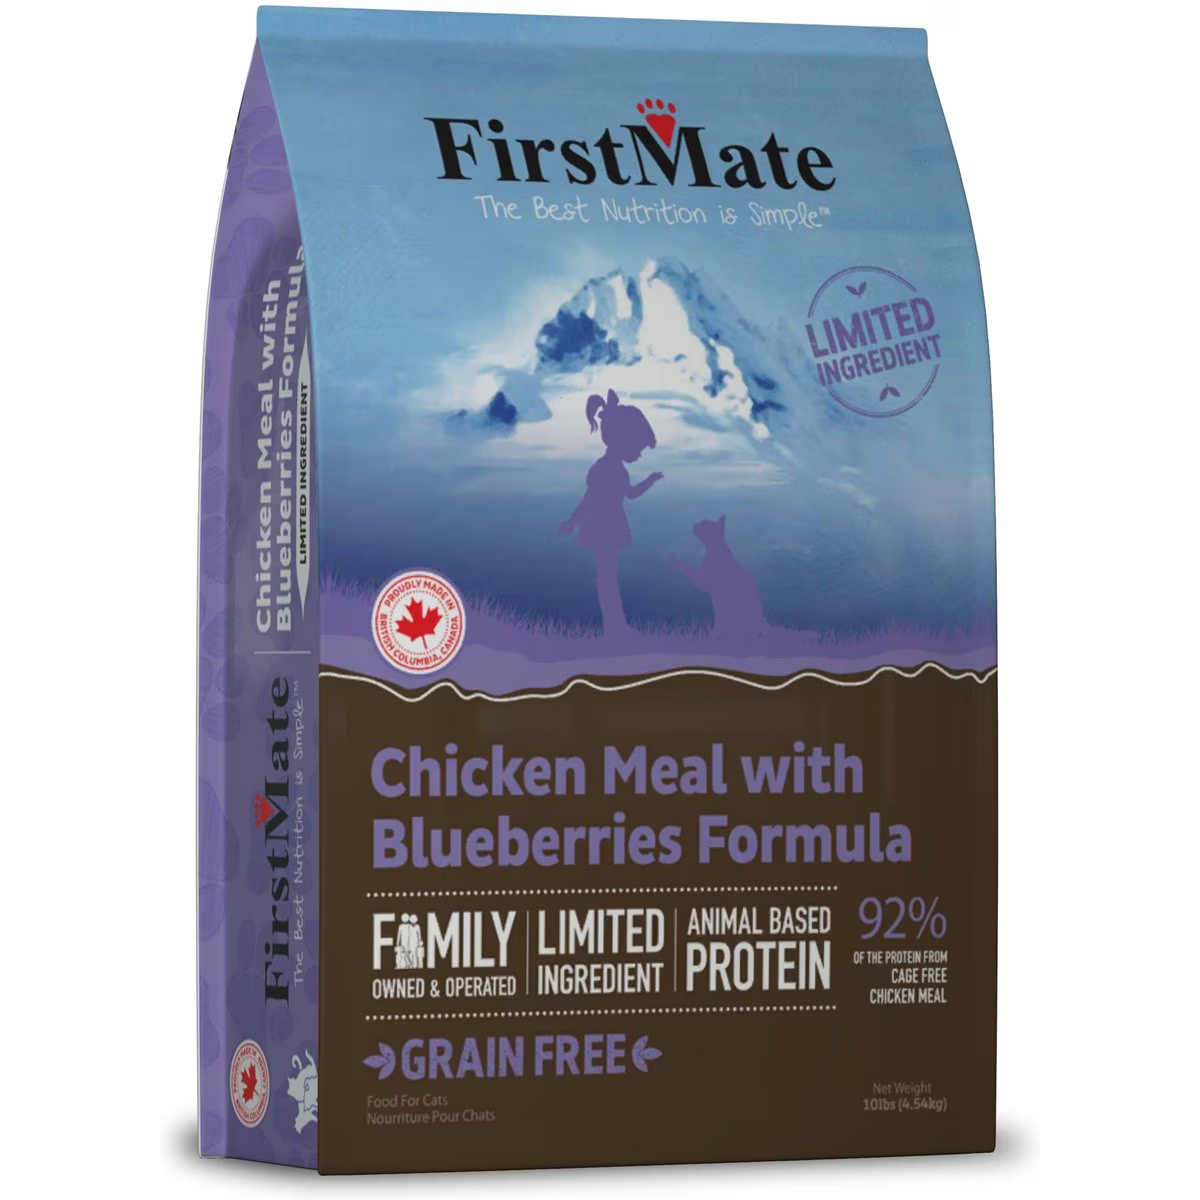 Firstmate Chicken Meal with Blueberries Formula Limited Ingredient Diet Grain-Free Dry Cat Food